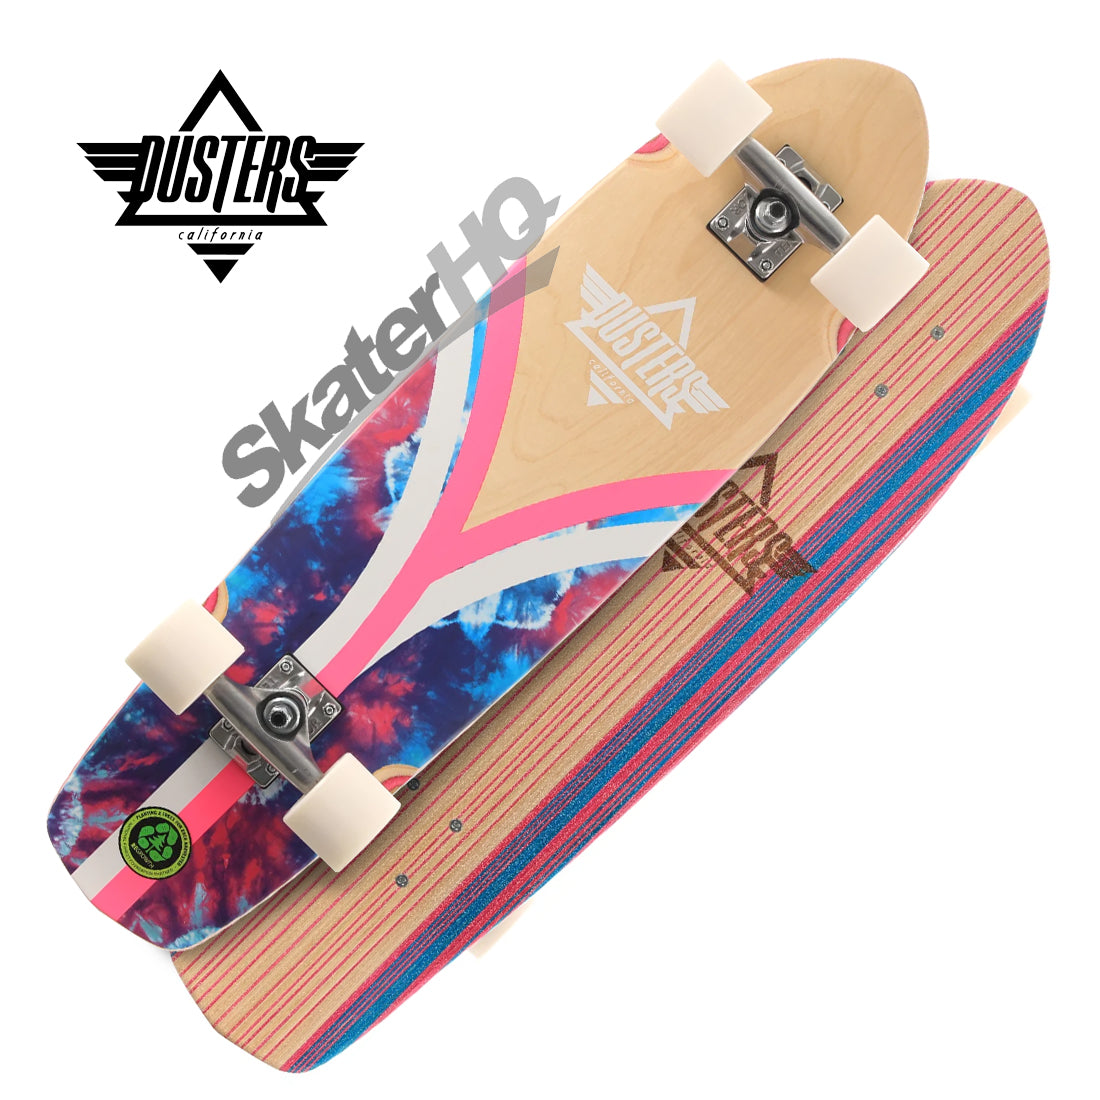 Dusters Flashback Cruiser 8.25x31 Complete - Tie Dye Skateboard Compl Cruisers